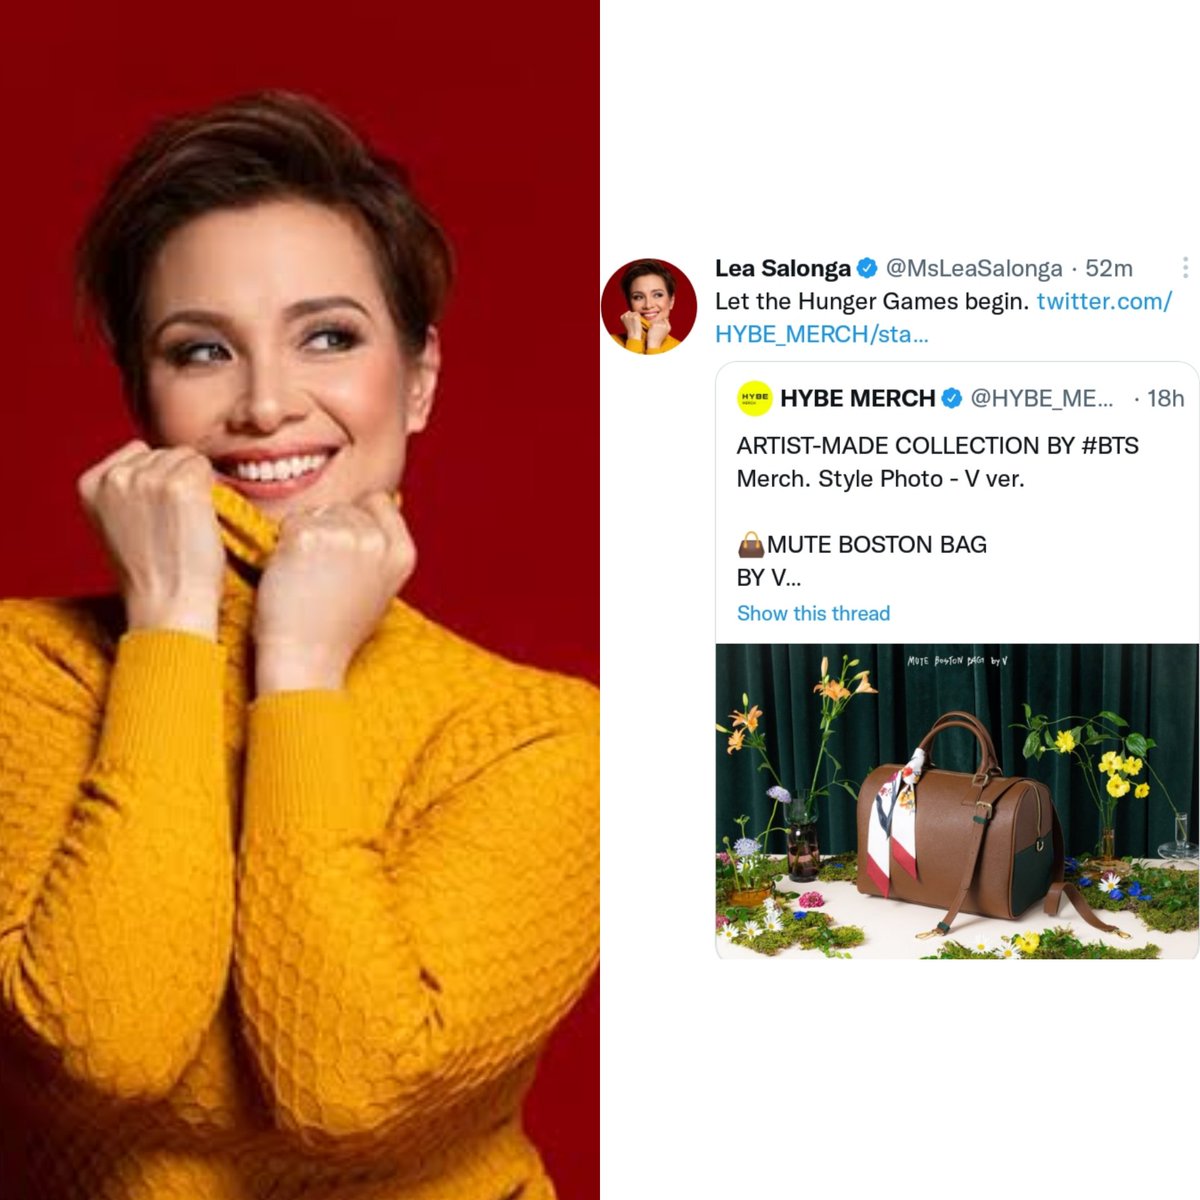 Lea Salonga joins fans in dismay over sold-out bag designed by BTS' V